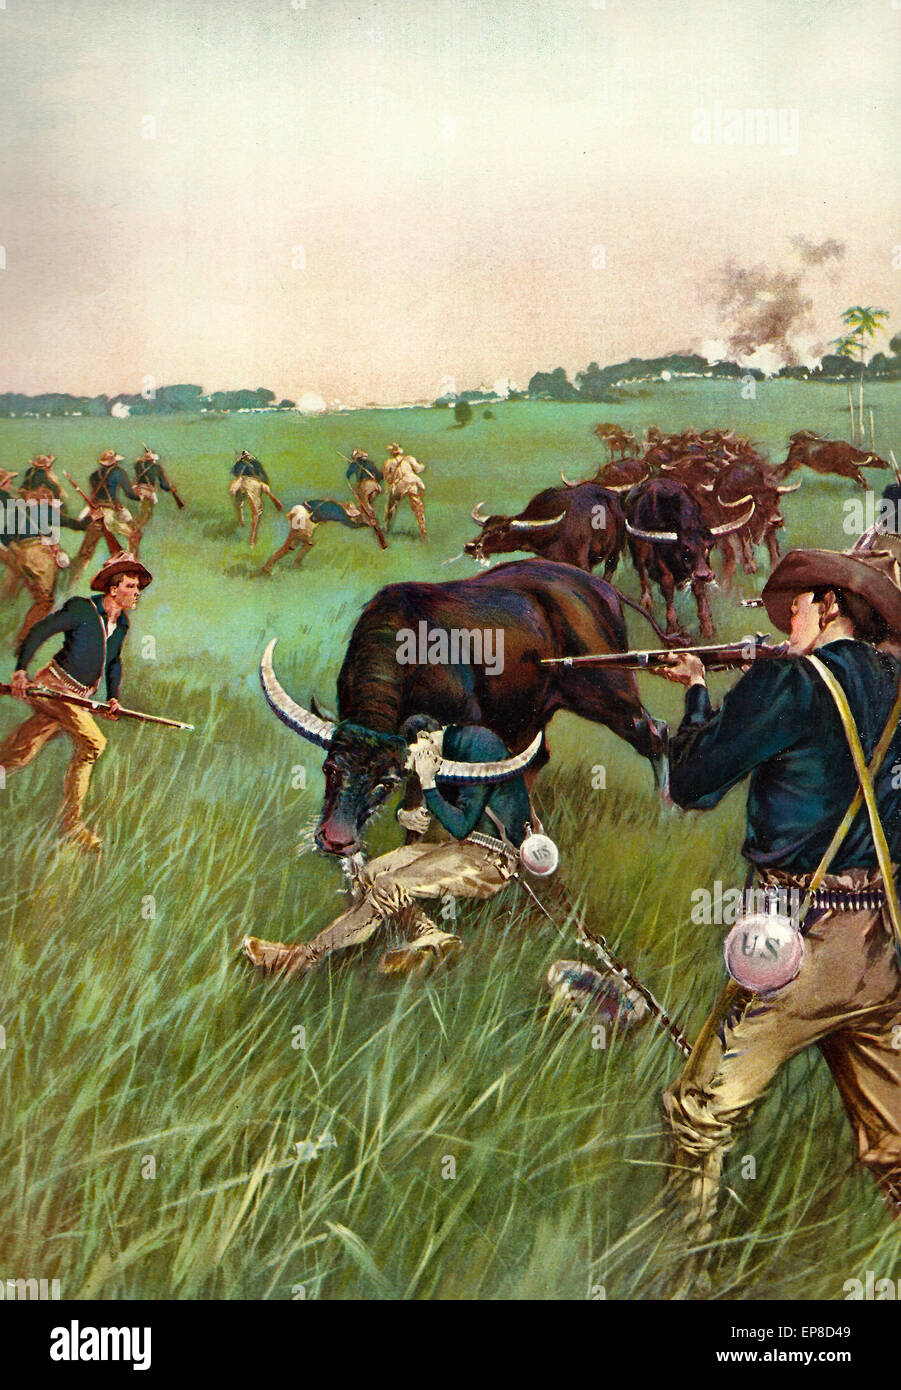 A Charge by Carabaos - American Soldiers charged by Carabaos during the Phiilippine American War  1899 Stock Photo